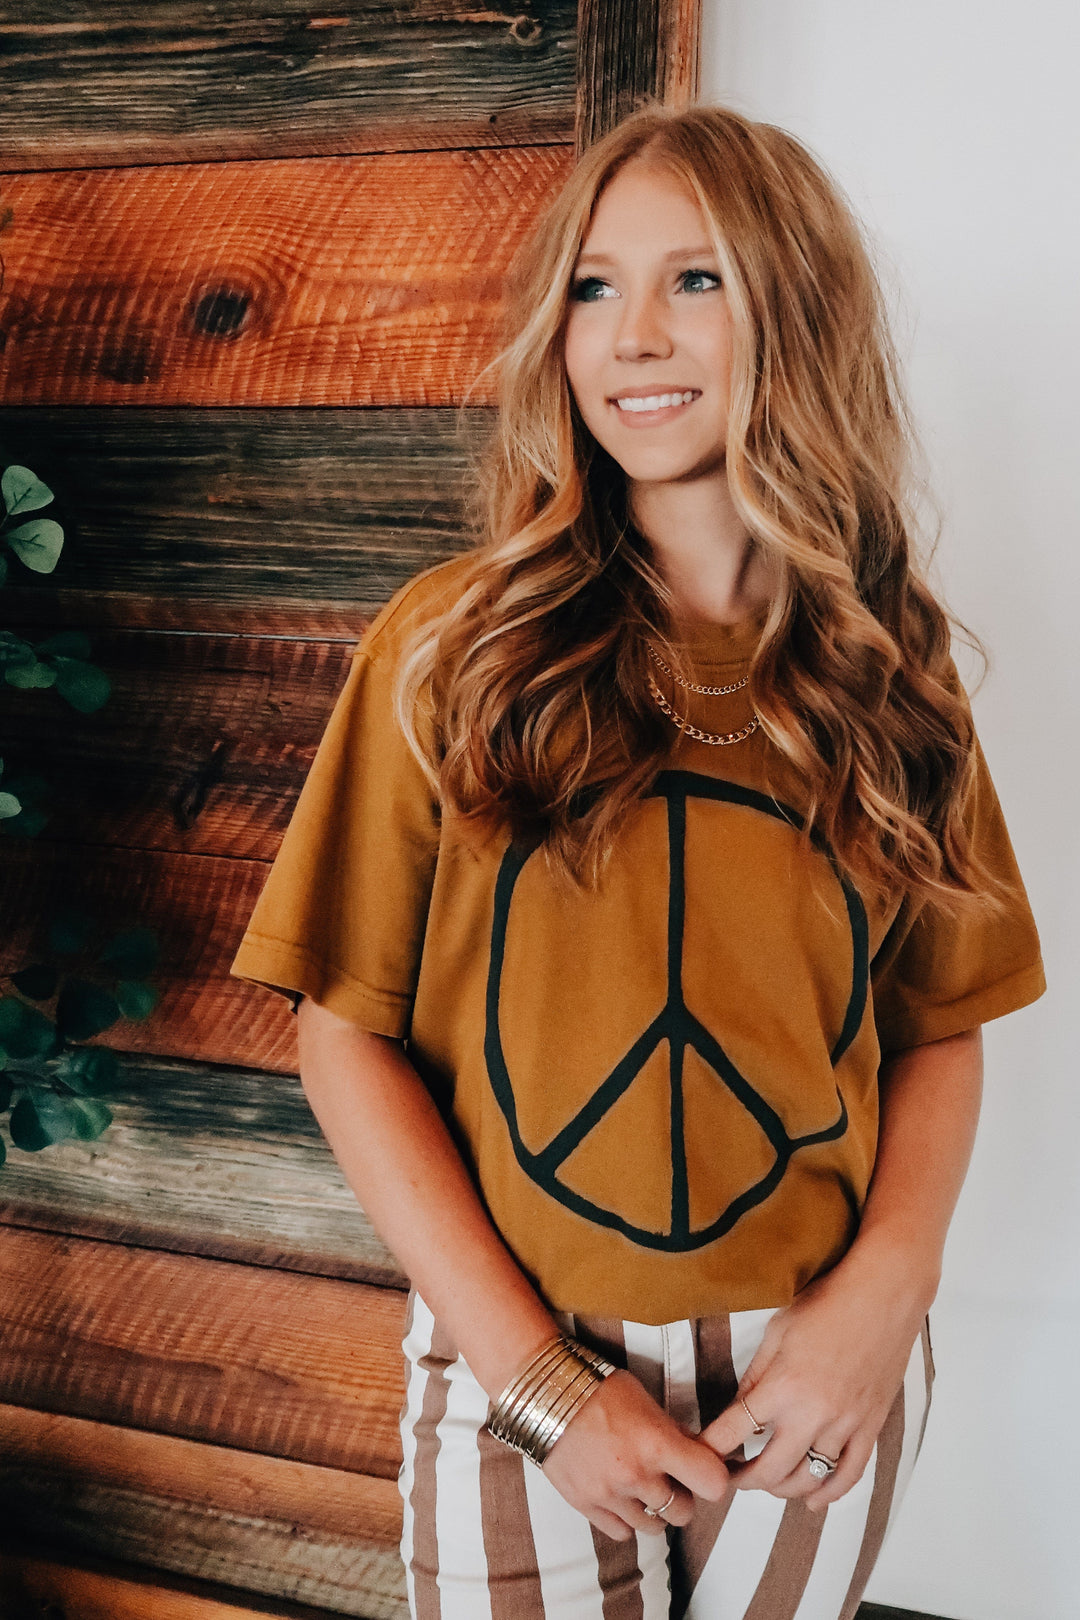 Never Regret Showing Kindness Mock Neck Tee-Graphic Tees-Krush Kandy, Women's Online Fashion Boutique Located in Phoenix, Arizona (Scottsdale Area)